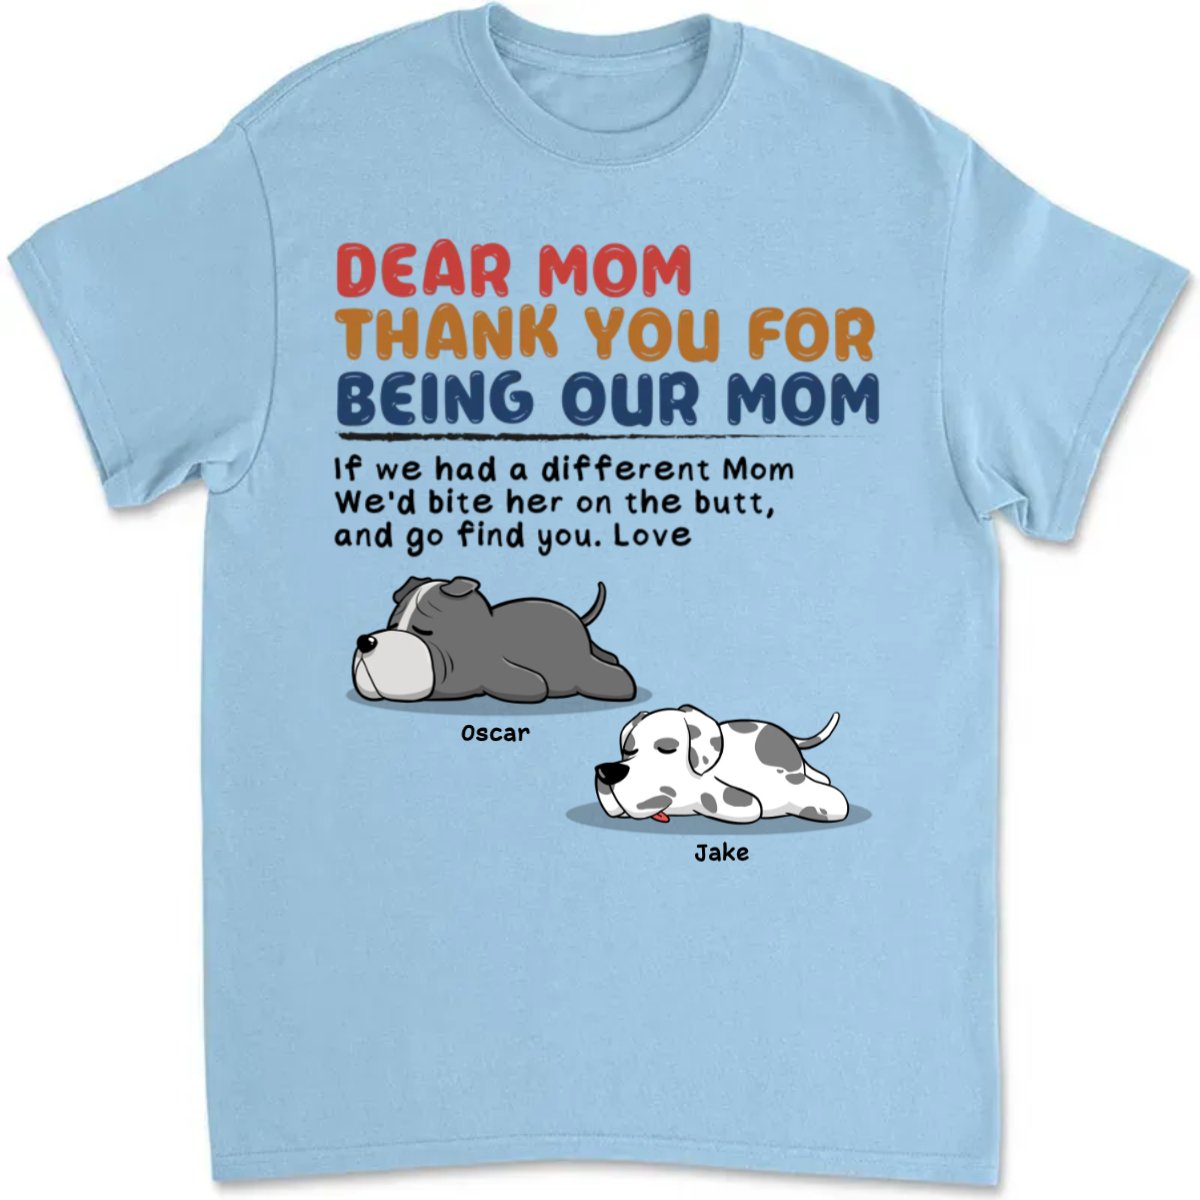 Dog Lovers - Dear Mom Thank You For Being Our Mom - Personalized T - shirt - The Next Custom Gift